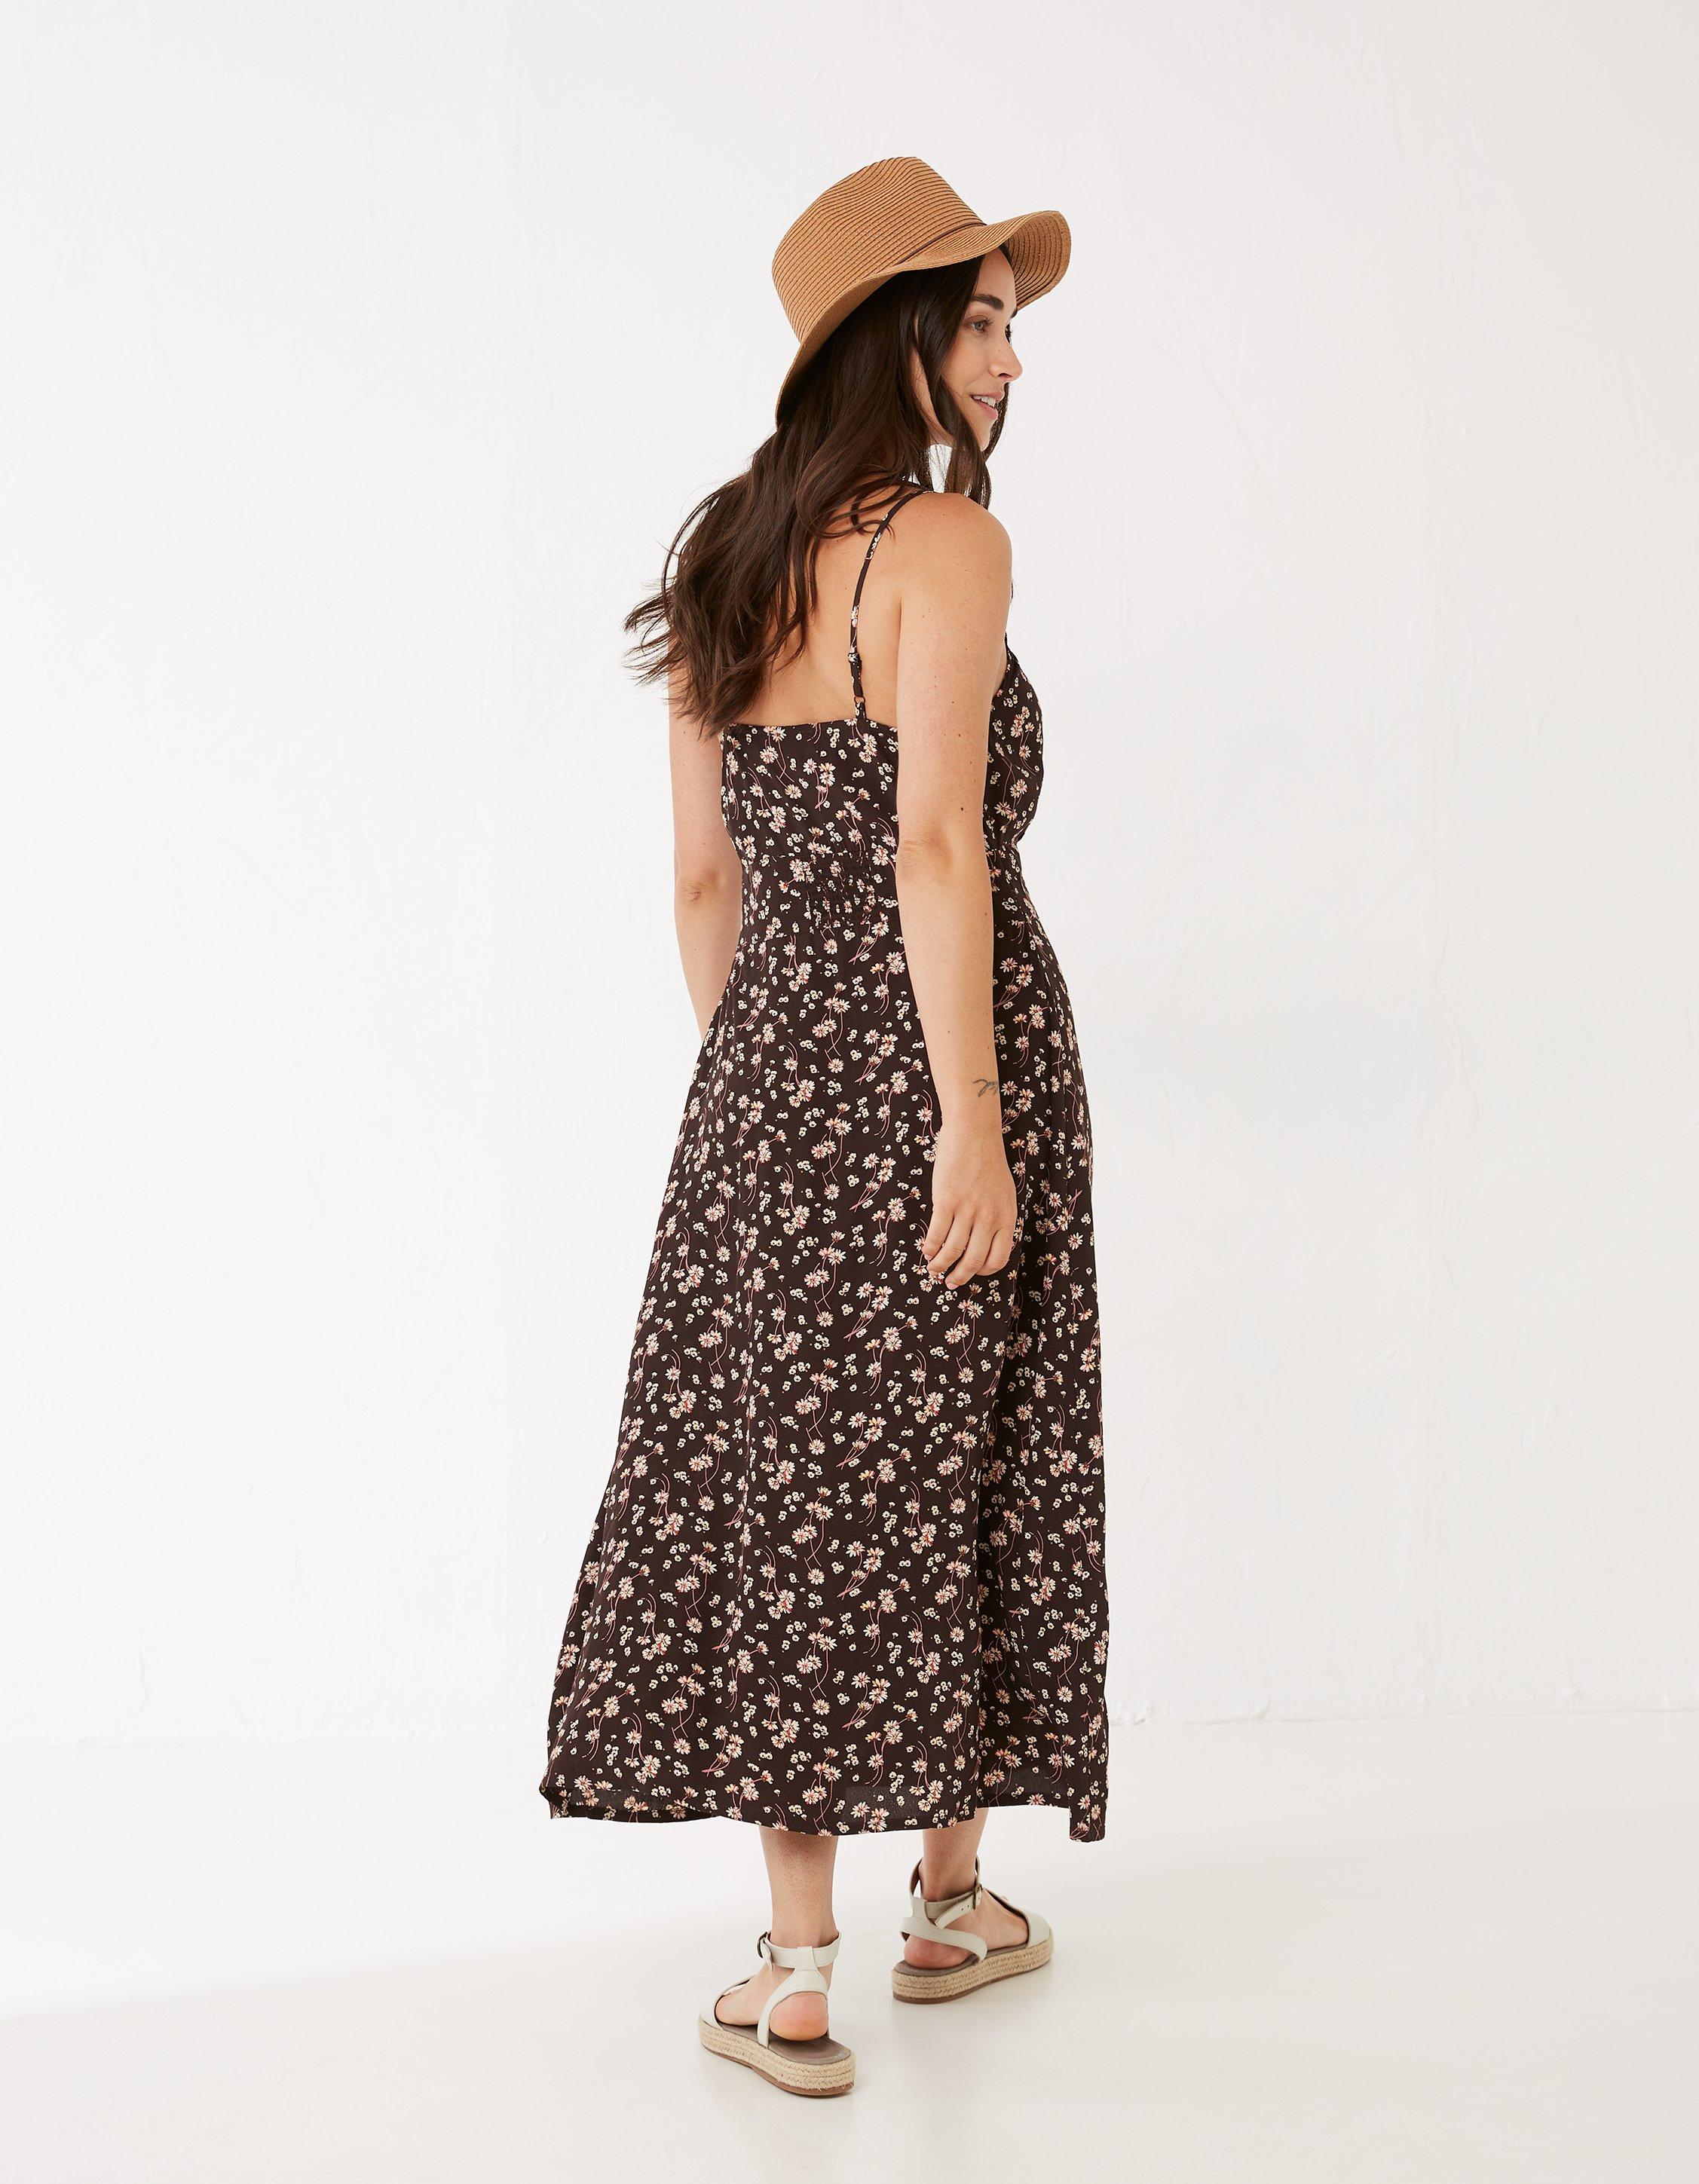 Daisy Print Tea Dress with Shirred Shoulder Detail